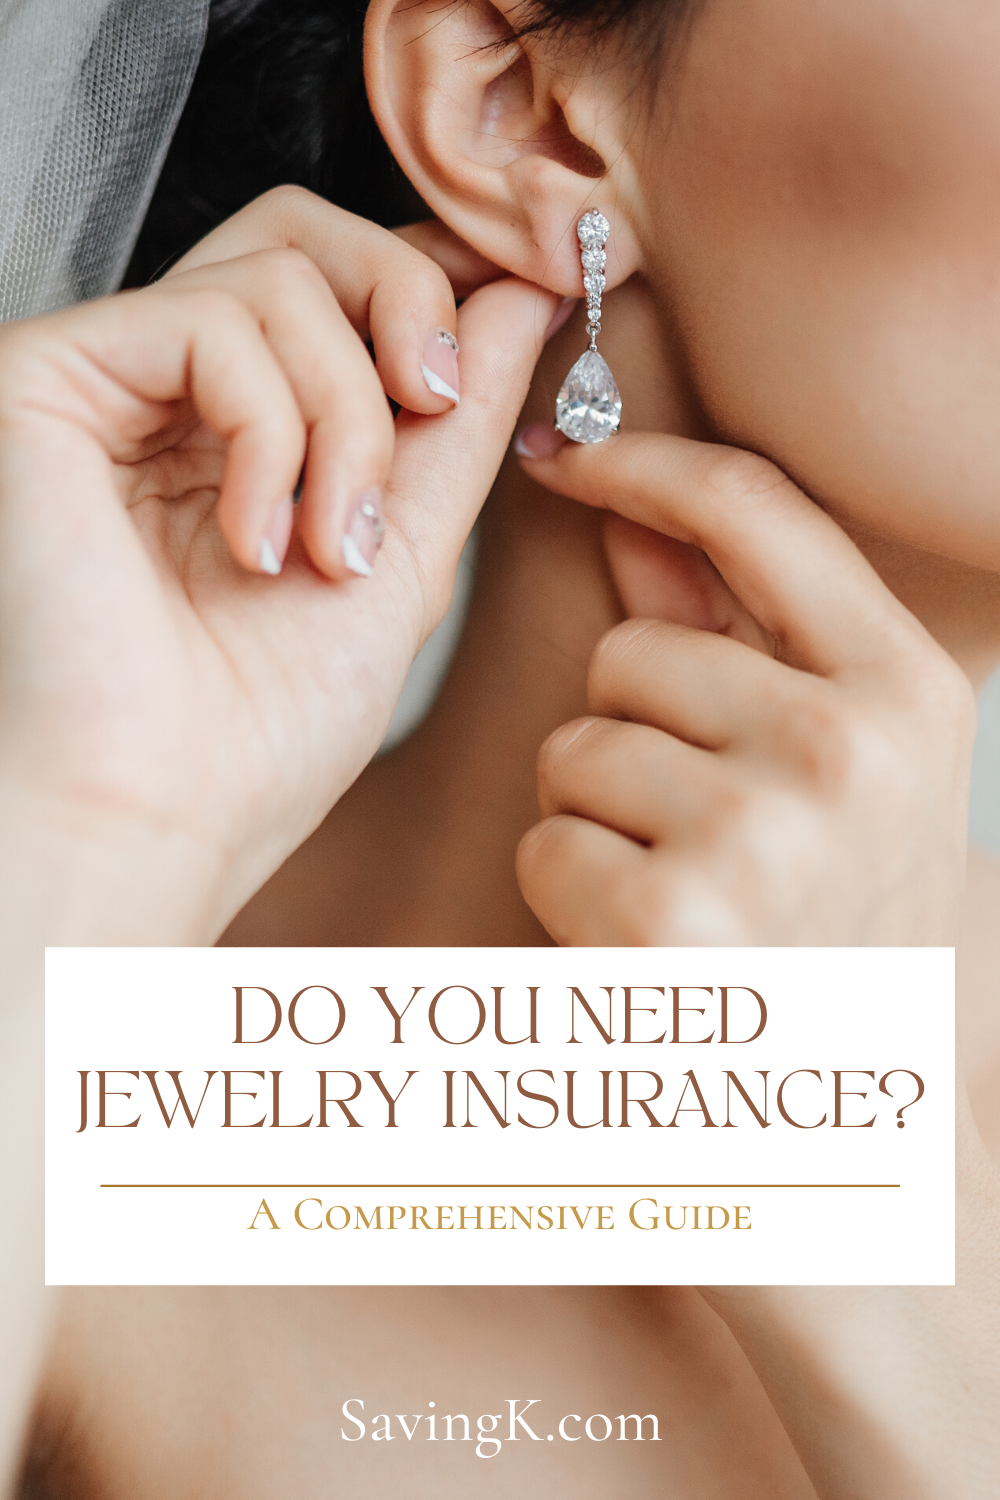 Who Needs Jewelry Insurance? A Comprehensive Guide